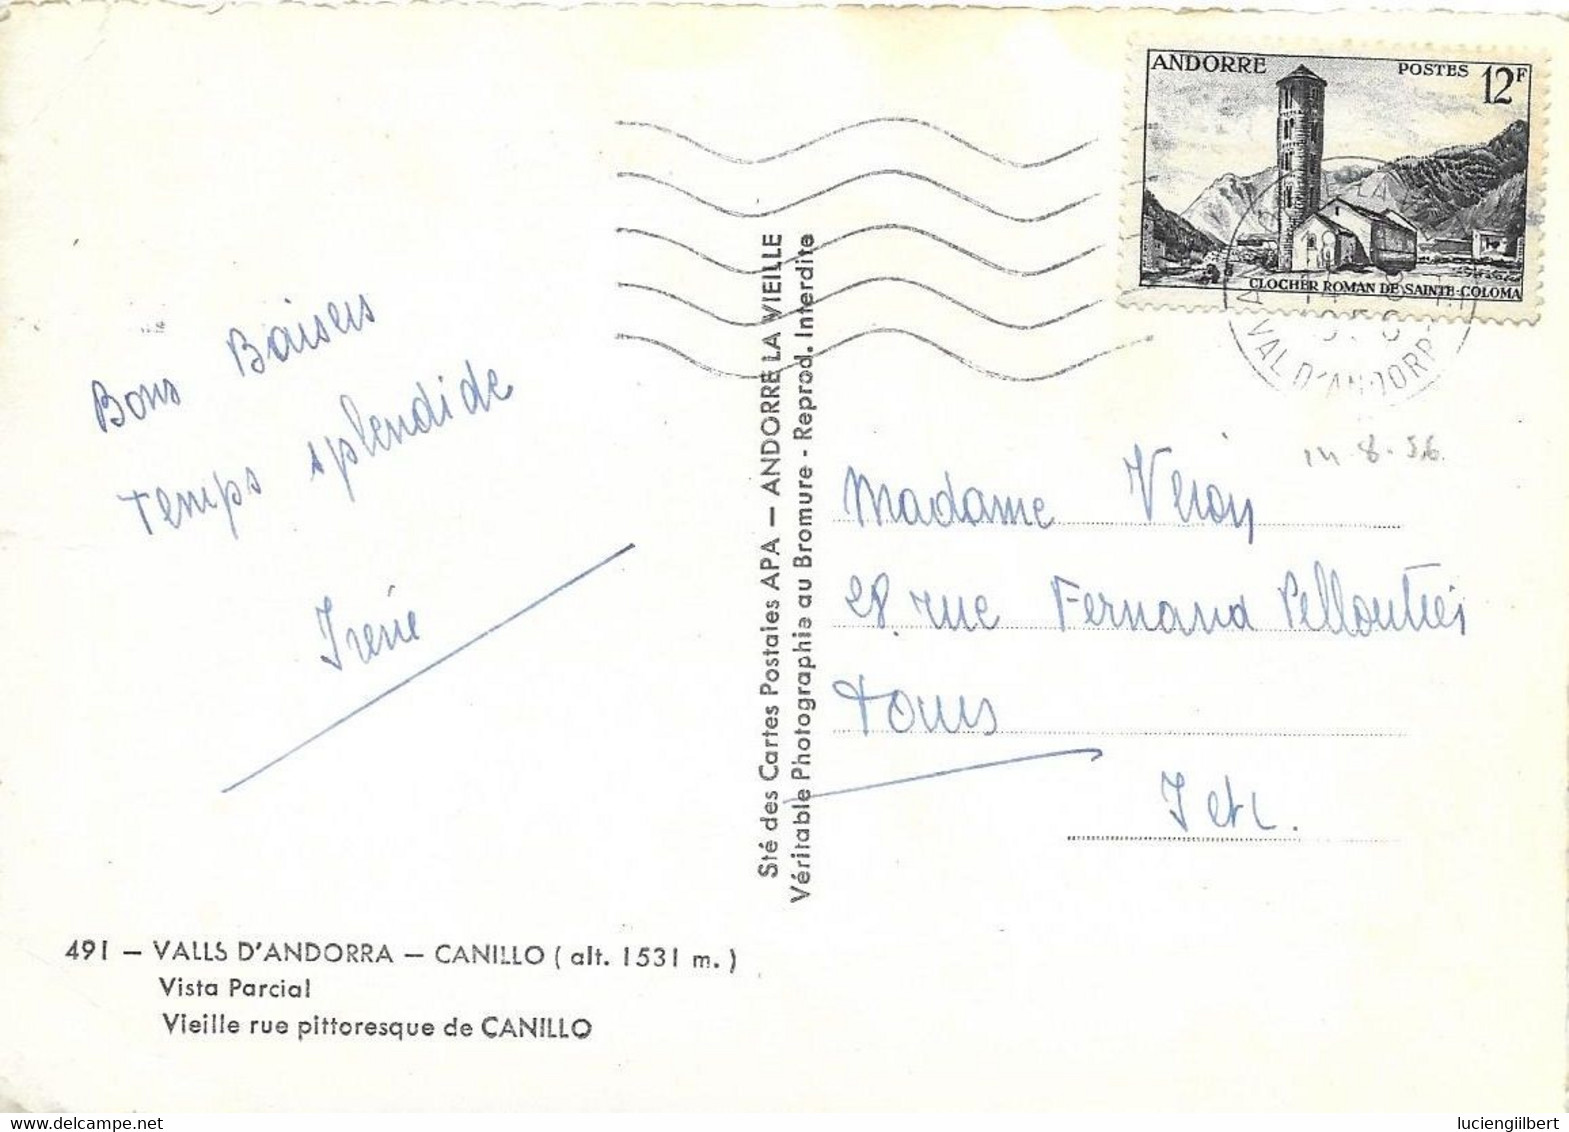 ANDORRE -    TIMBRES  N° 145  -  SAINTE COLOMA  -  TARIF CP 6 01 49 AU 30 6 57  -  1956 - Covers & Documents